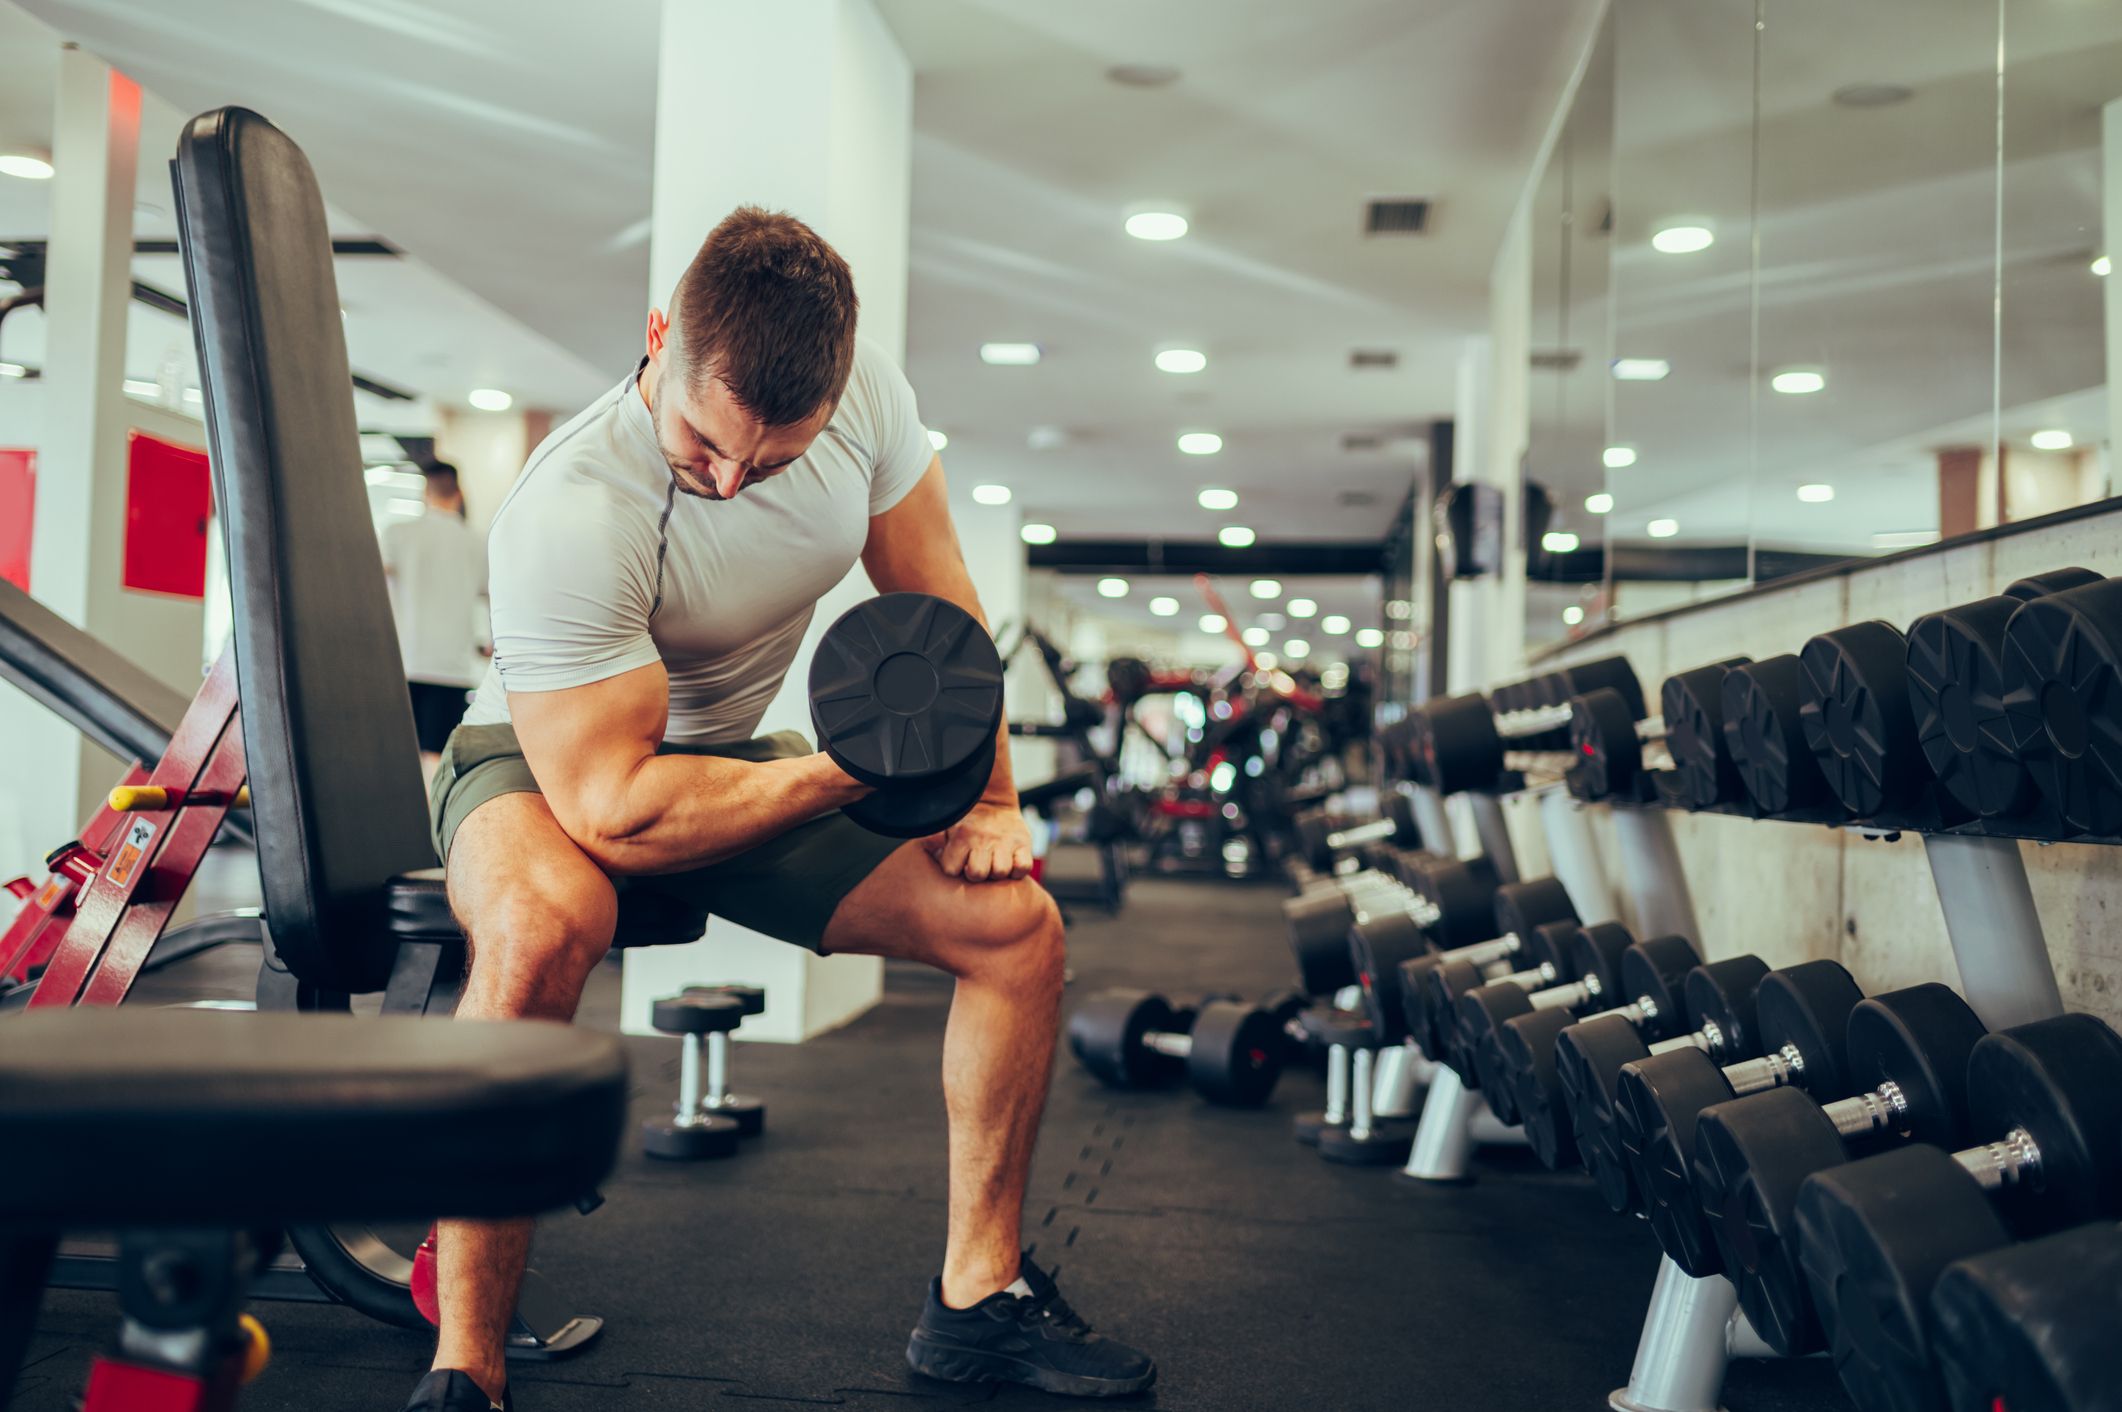 How To Get Bigger Legs Without Lifting Weights